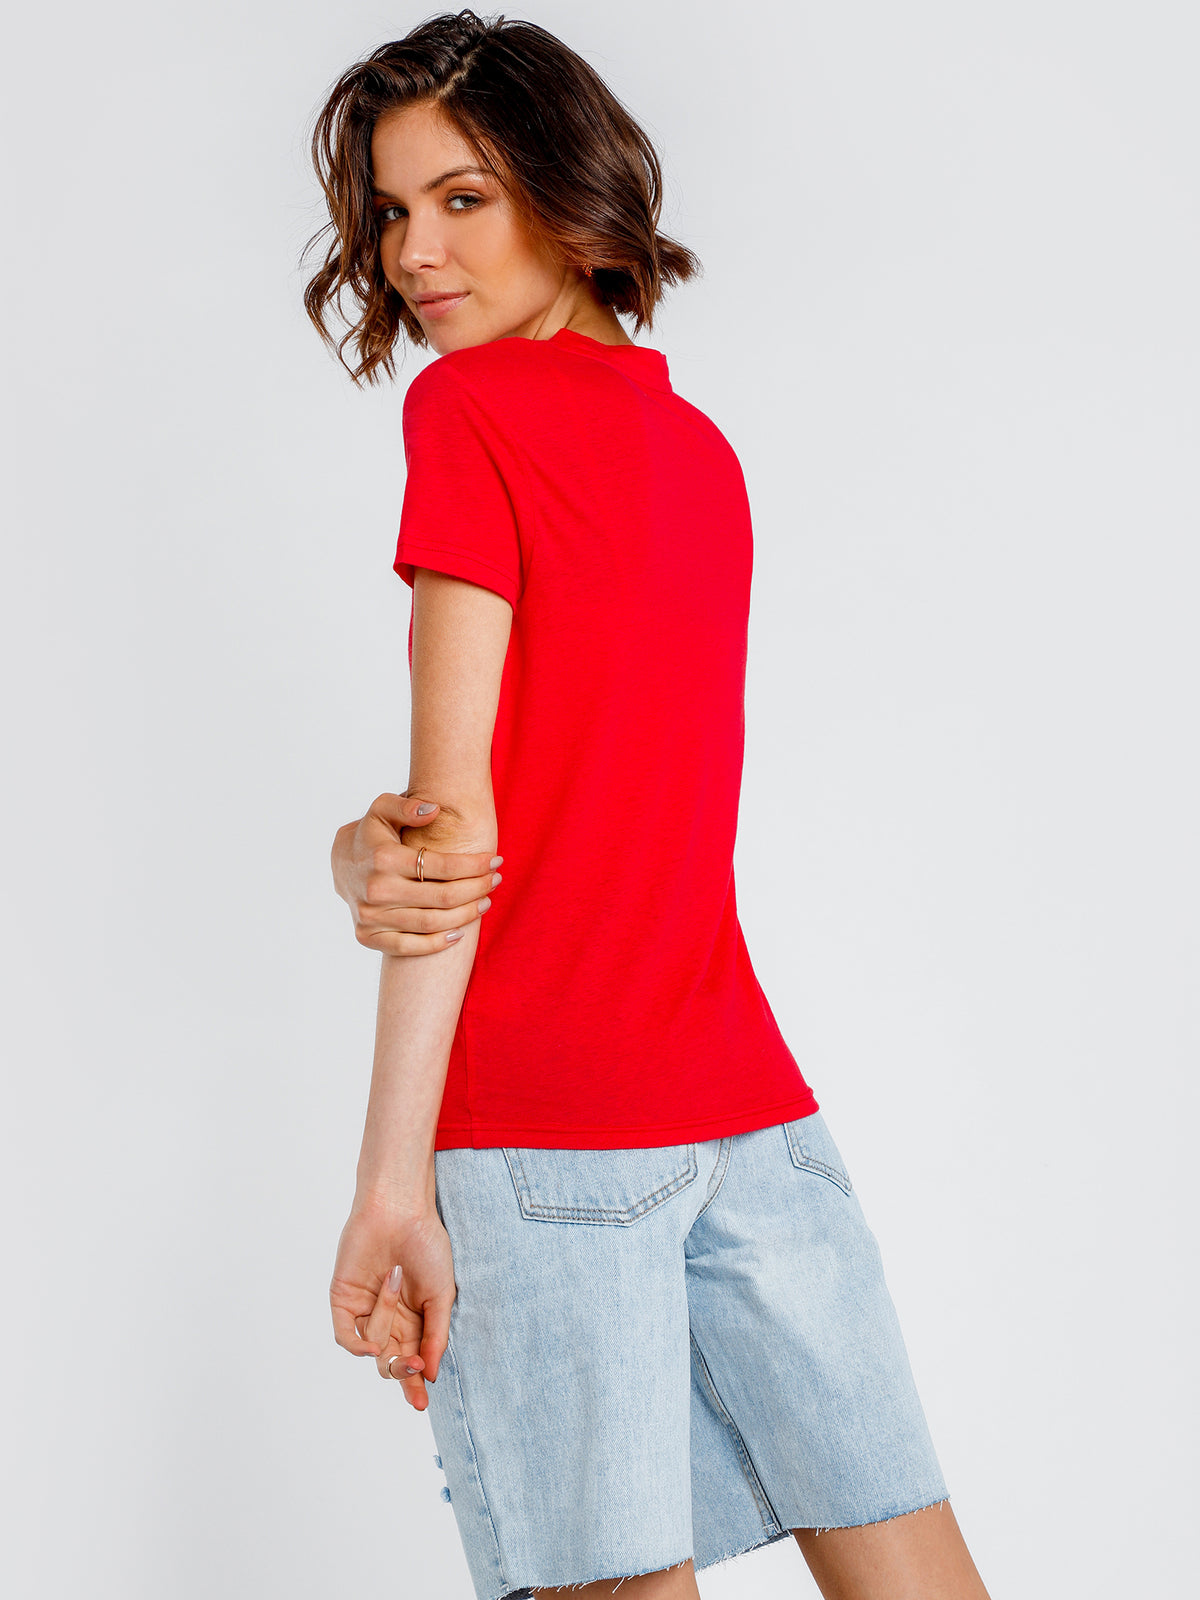 Atwood Fitted T-Shirt in Cherry Red